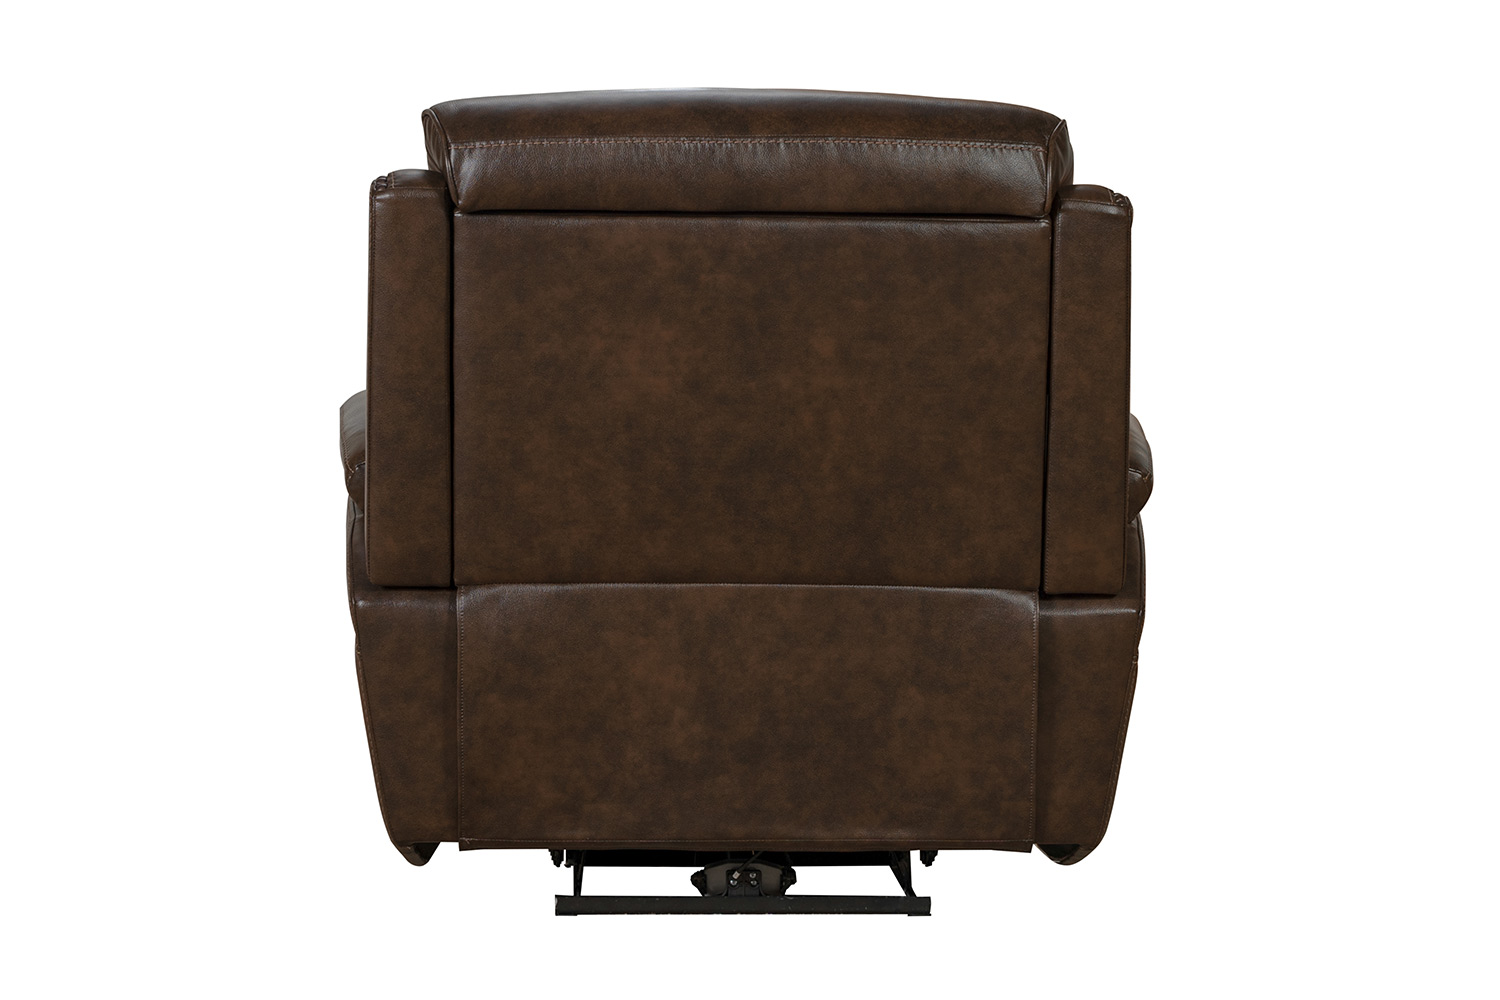 Barcalounger Sandover Power Recliner Chair with Power Head Rest and Lumbar - Tri-Tone Chocolate/Leather match